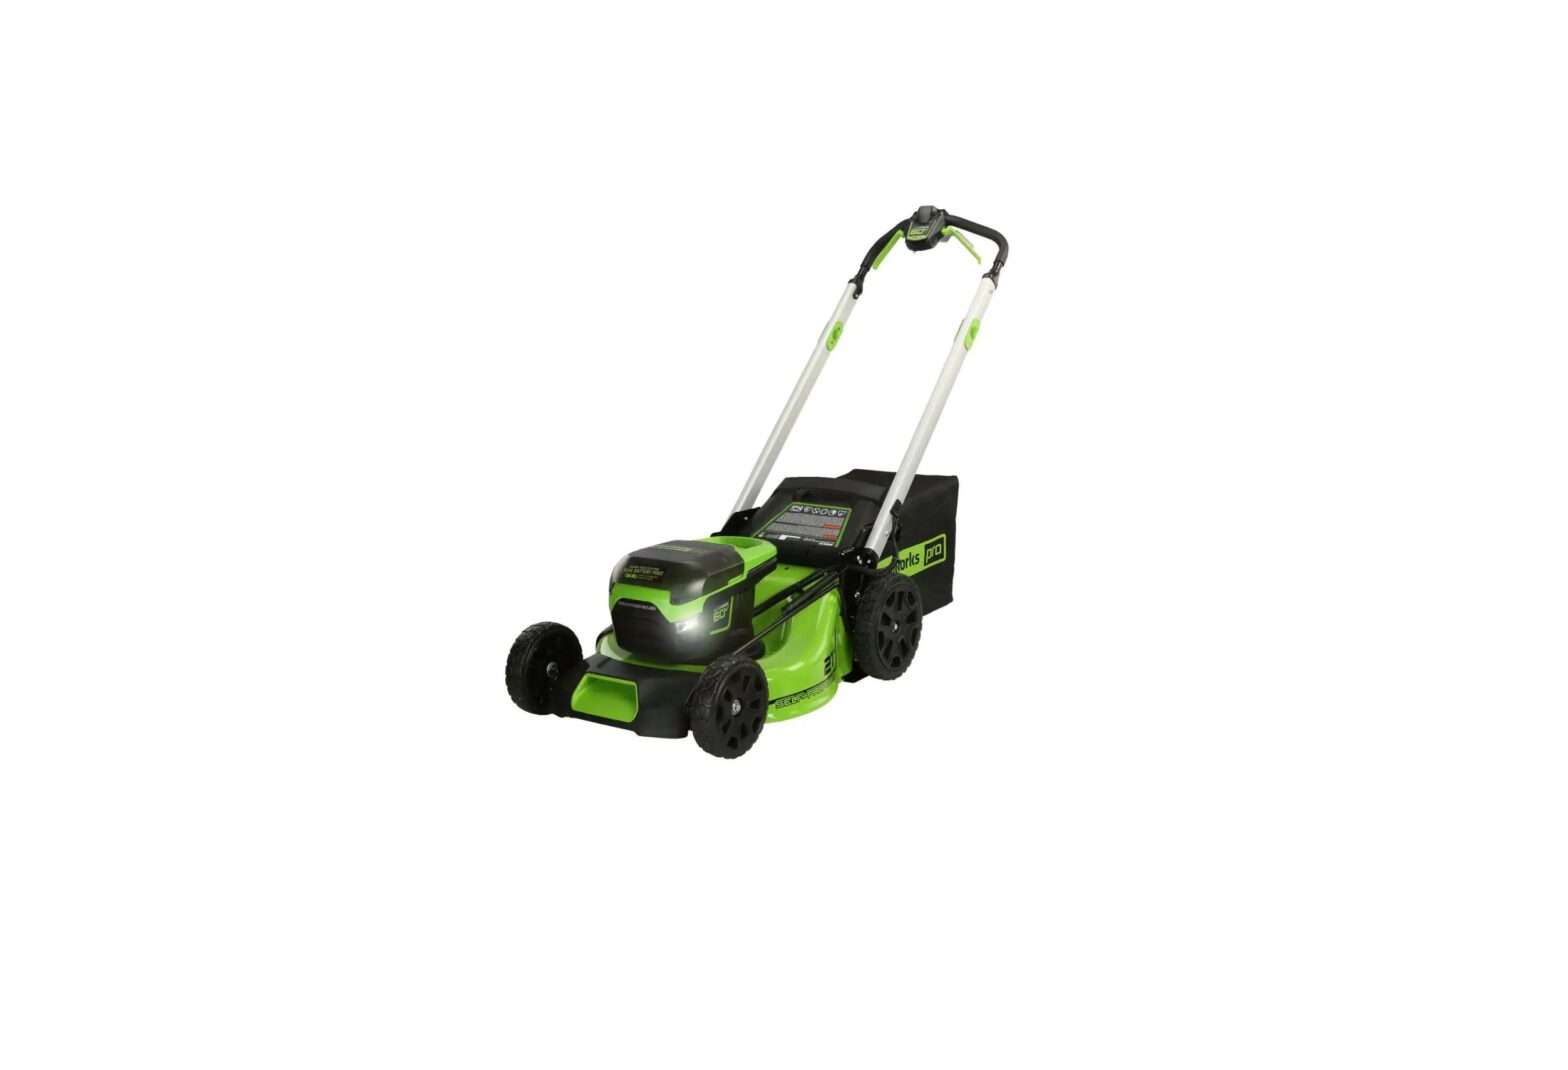 Greenworks MO60L01 PRO 60V 21 BRUSHLESS SELF-PROPELLED LAWN MOWER User Manual - Featured image